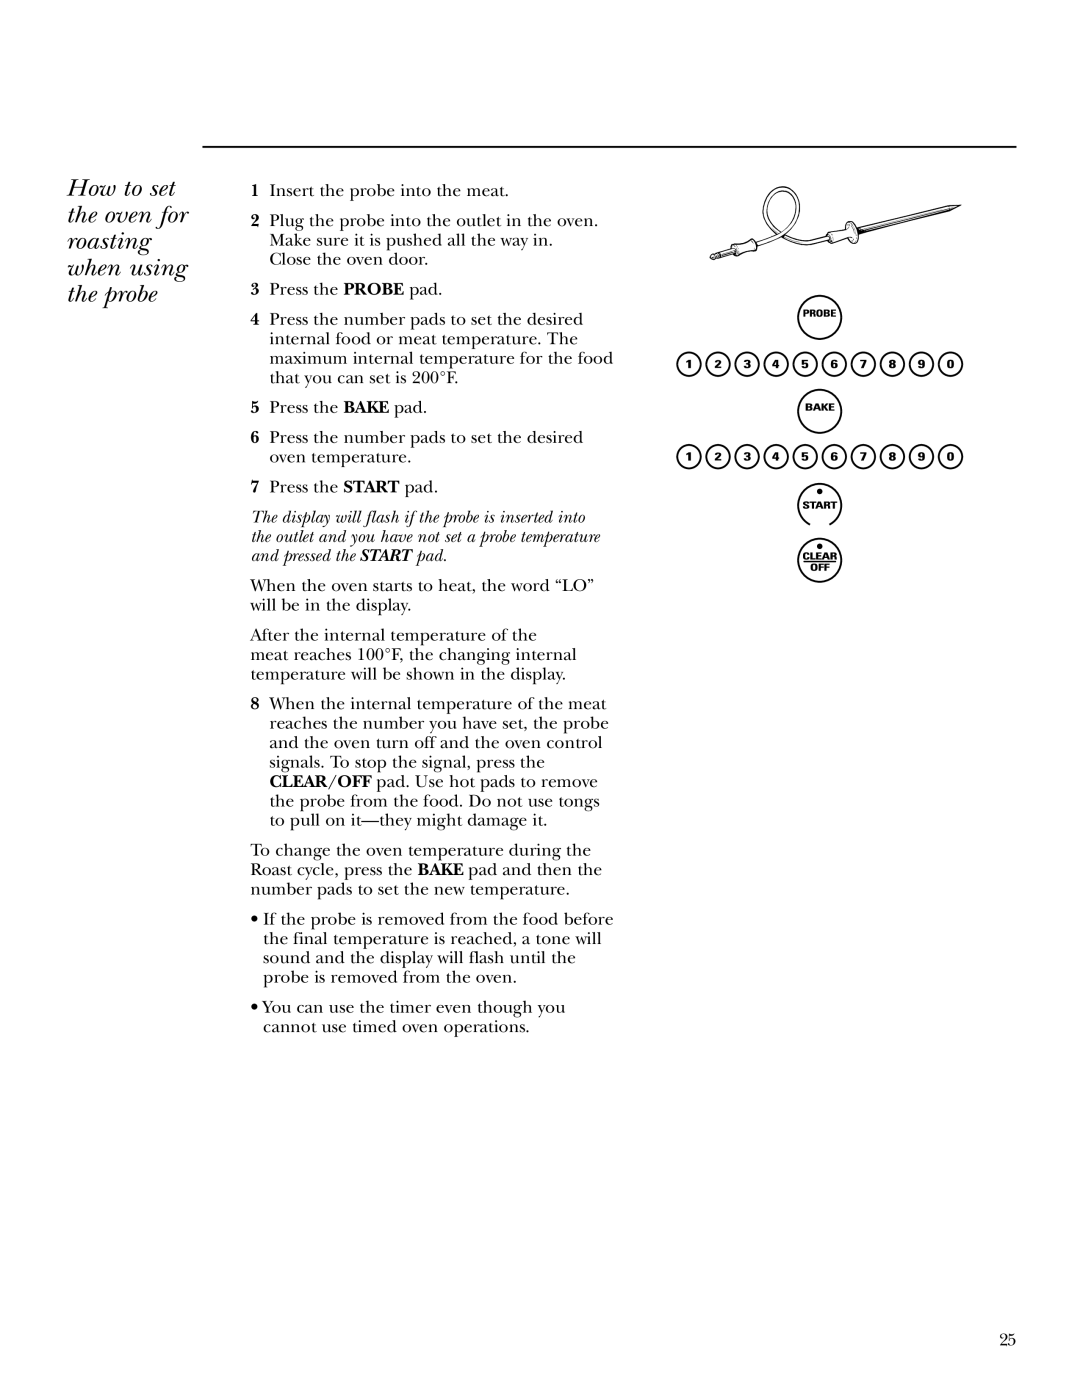 GE ZEK938, ZEK958 owner manual How to set the oven for roasting when using the probe 